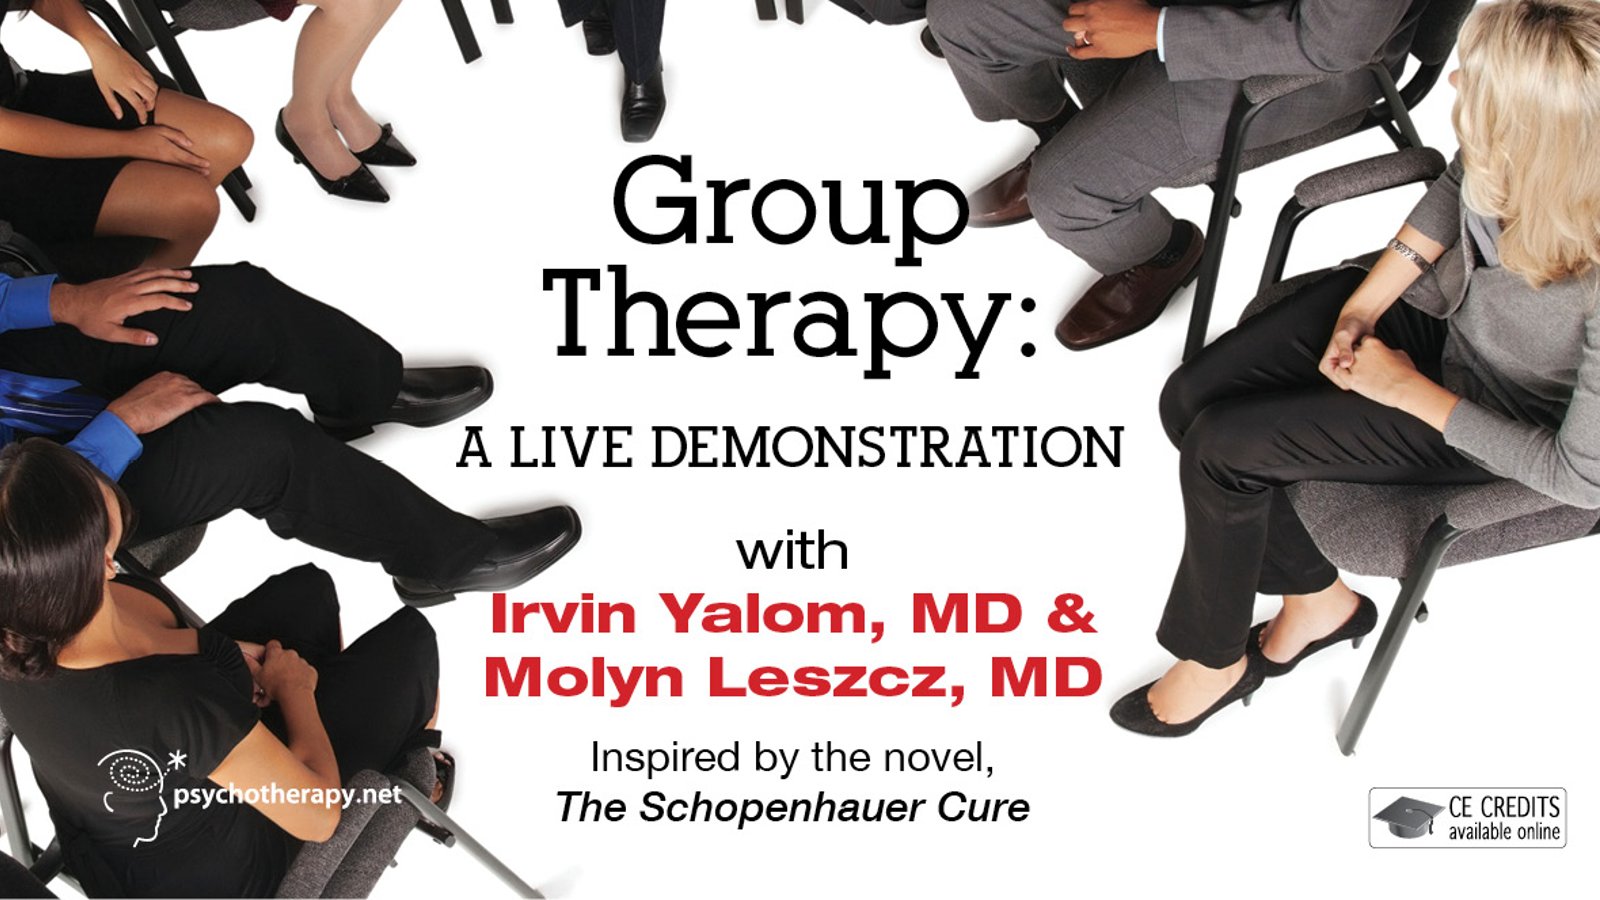 Group Therapy: A Live Demonstration - With Irvin Yalom